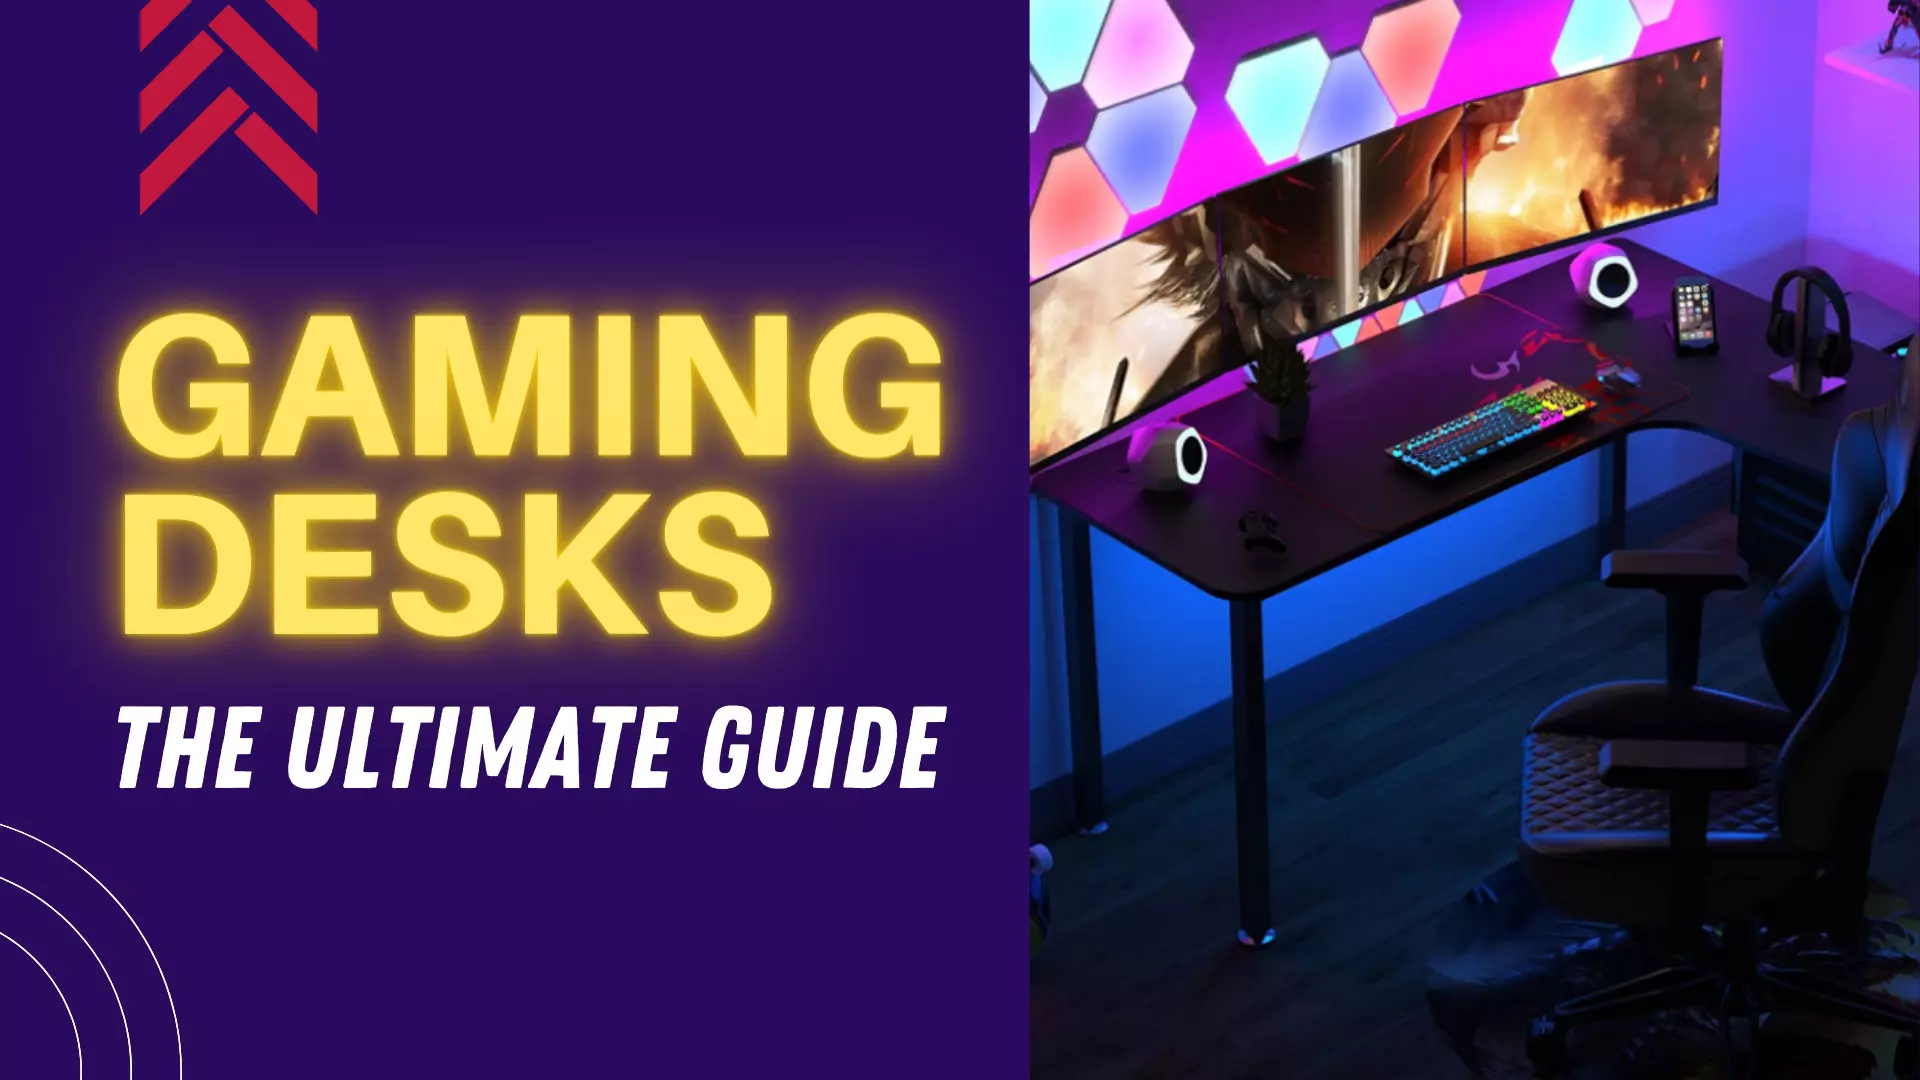 Types of Gaming Desks: The Ultimate Guide